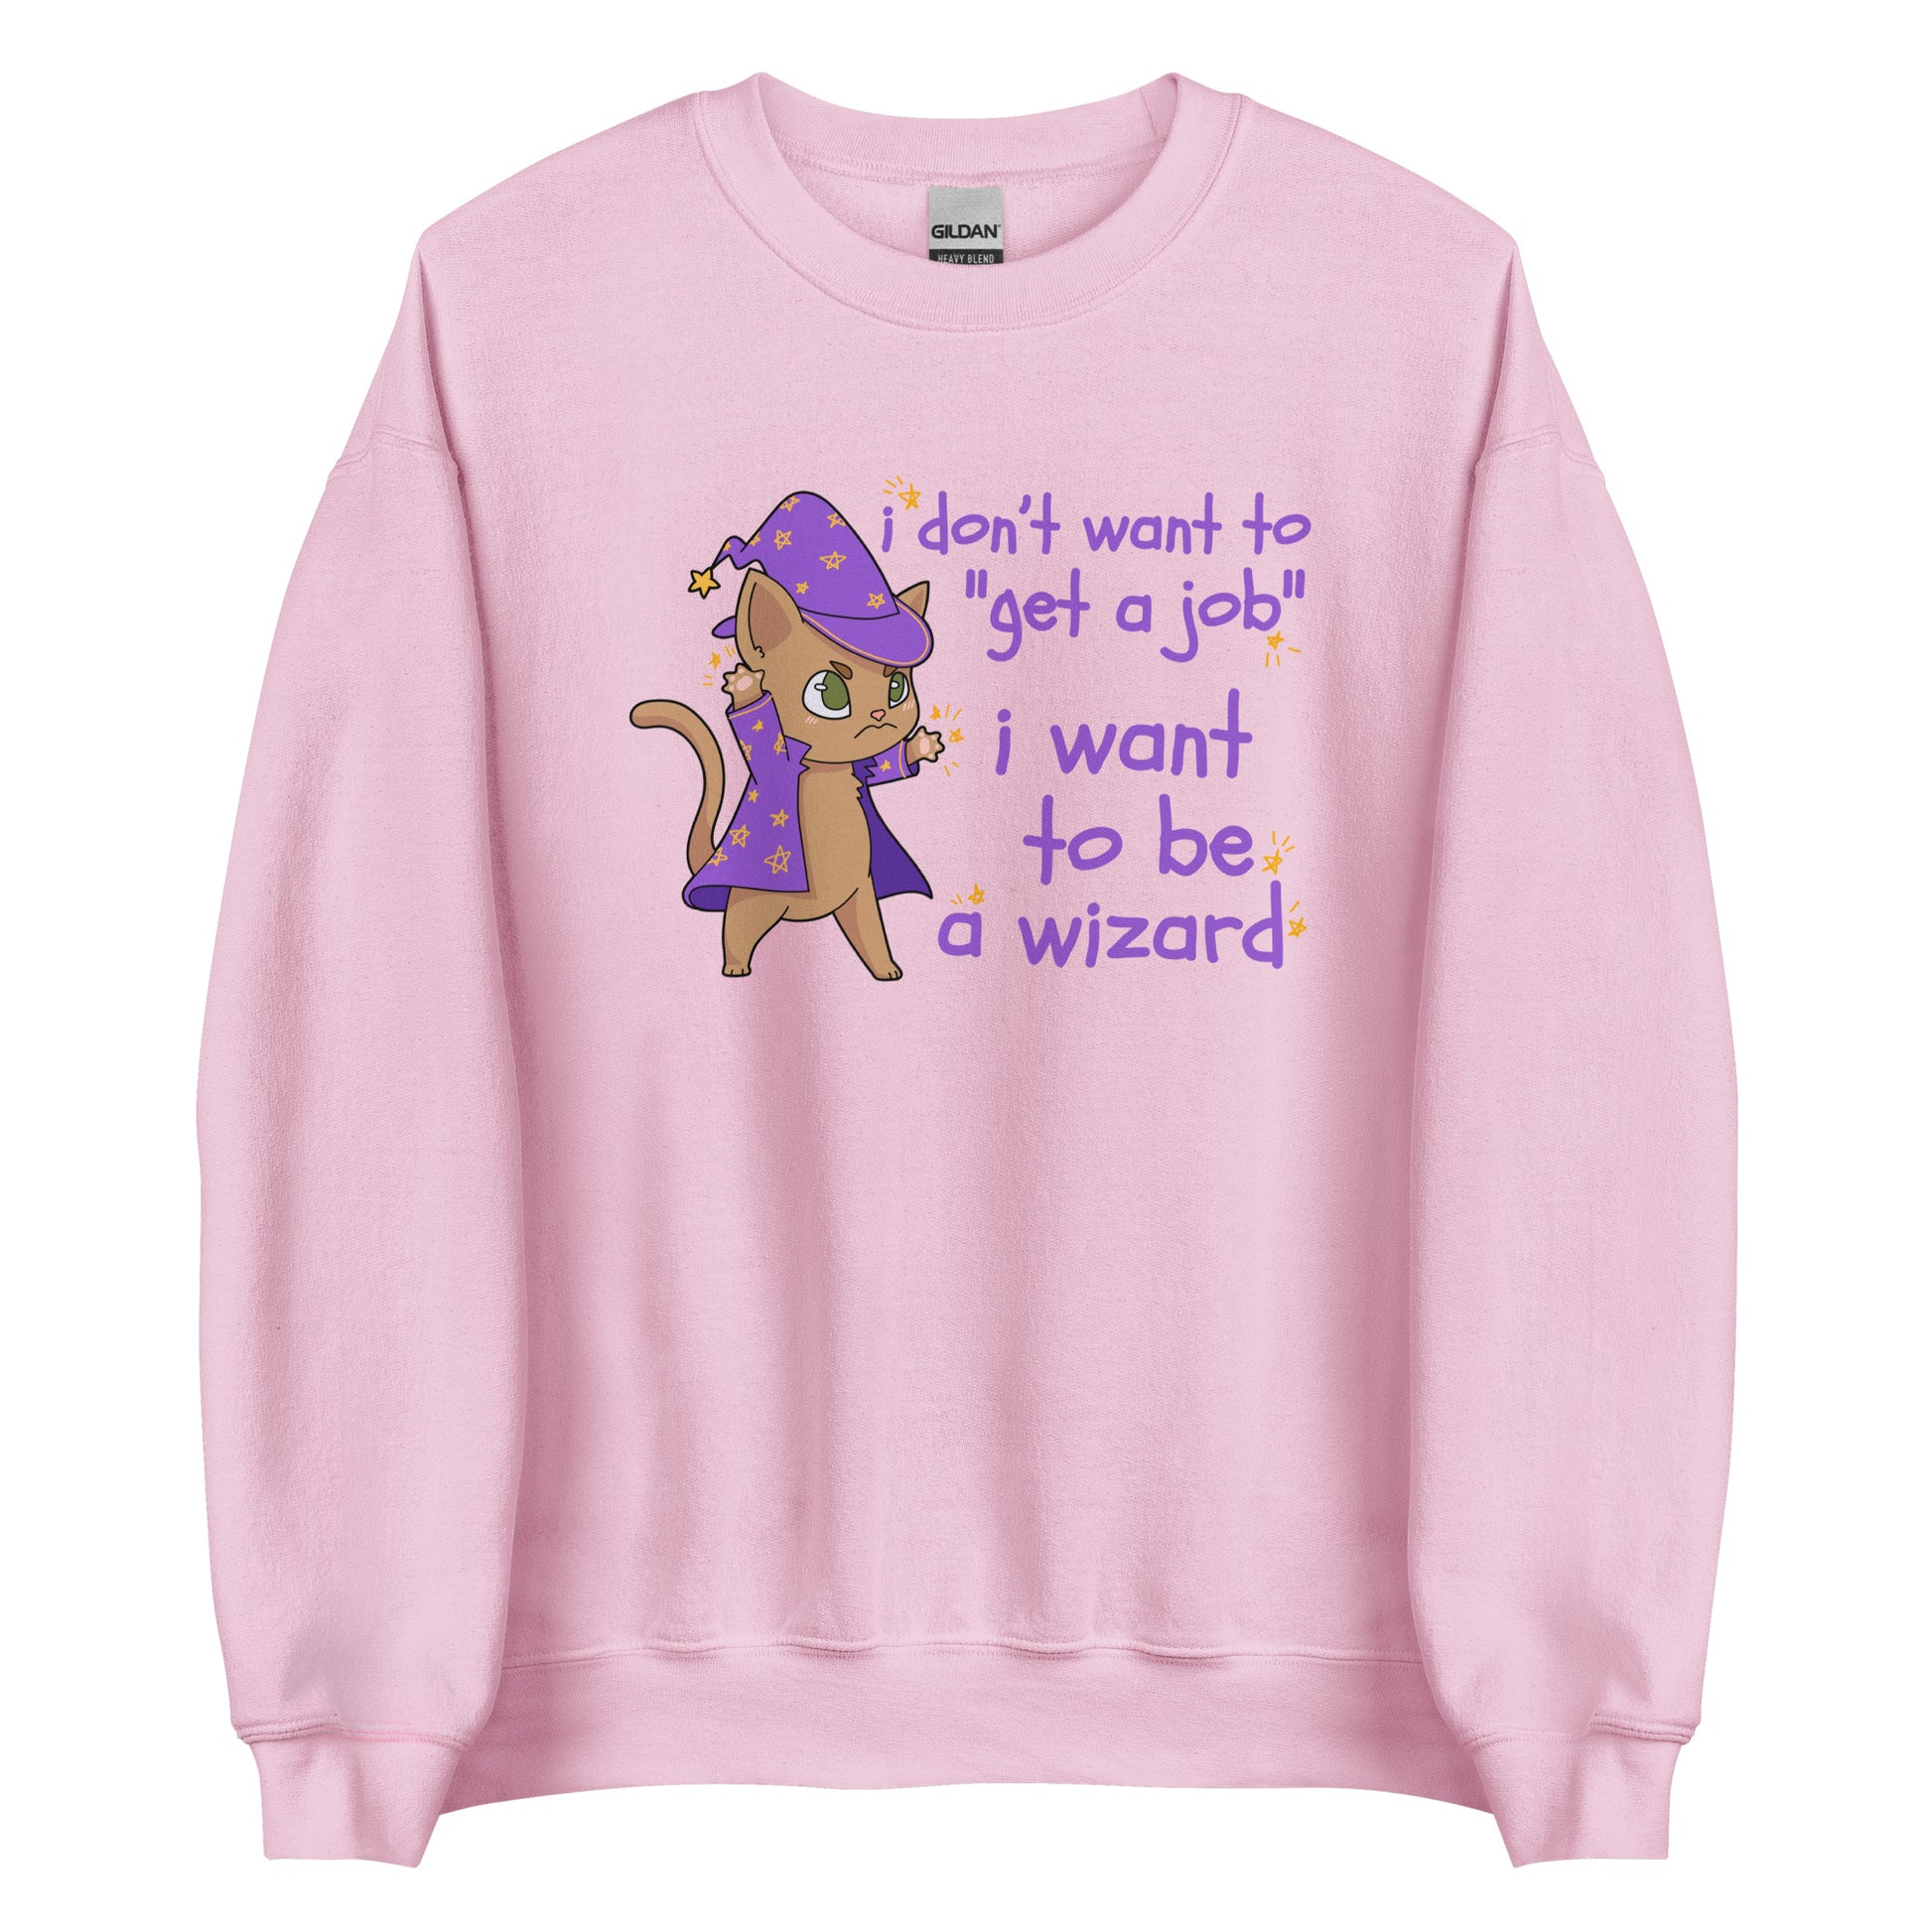 A light pink crewneck sweatshirt featuring an illustration of a small cat wearing wizard robes and a hat. Text alongside the cat reads "i don't want to "get a job". i want to be a wizard."